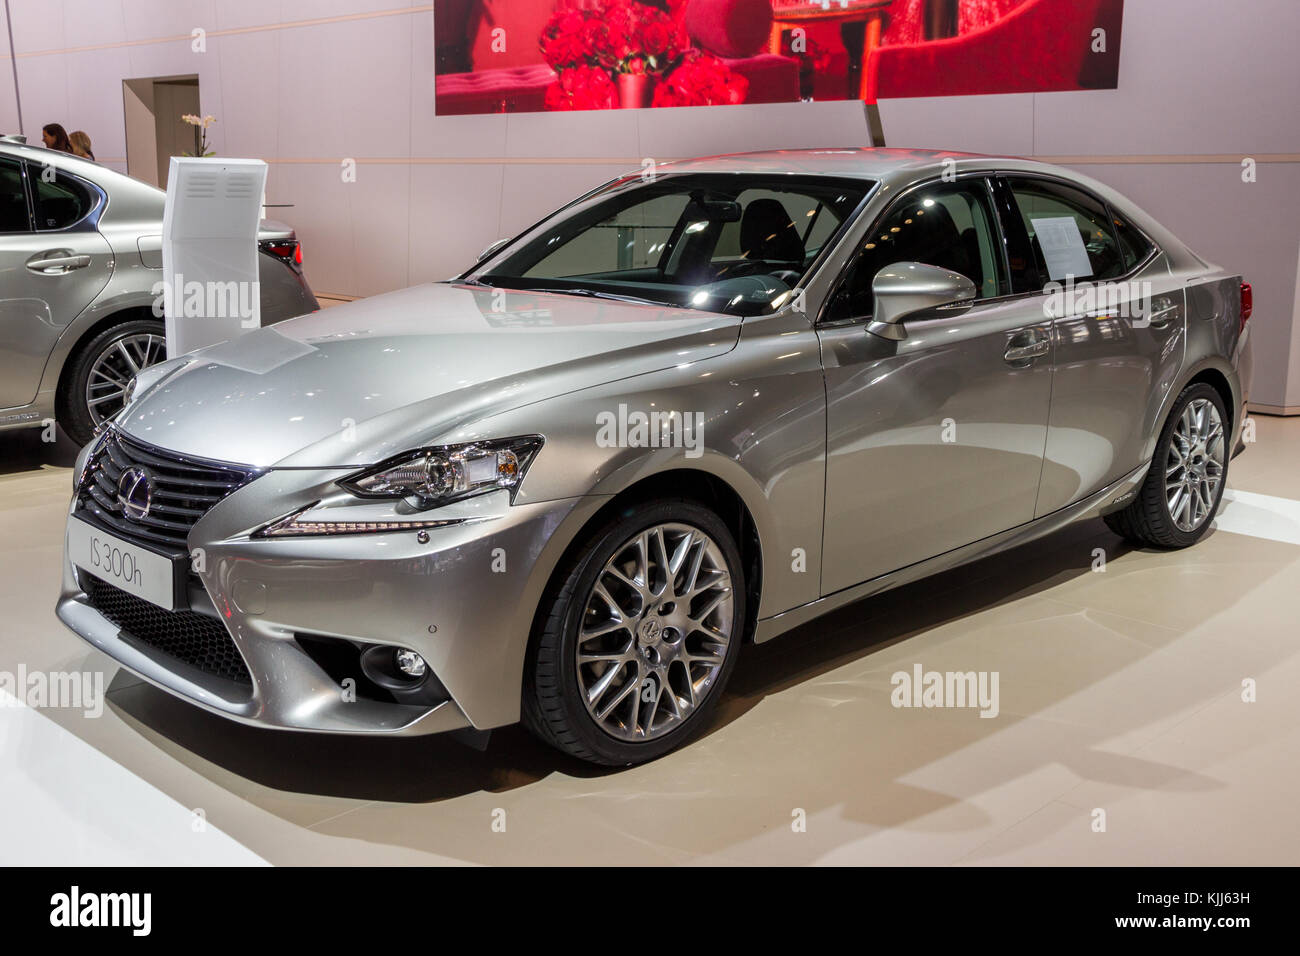 BRUSSELS - JAN 12, 2016: Lexus IS 300h car showcased at the Brussels Motor Show. Stock Photo